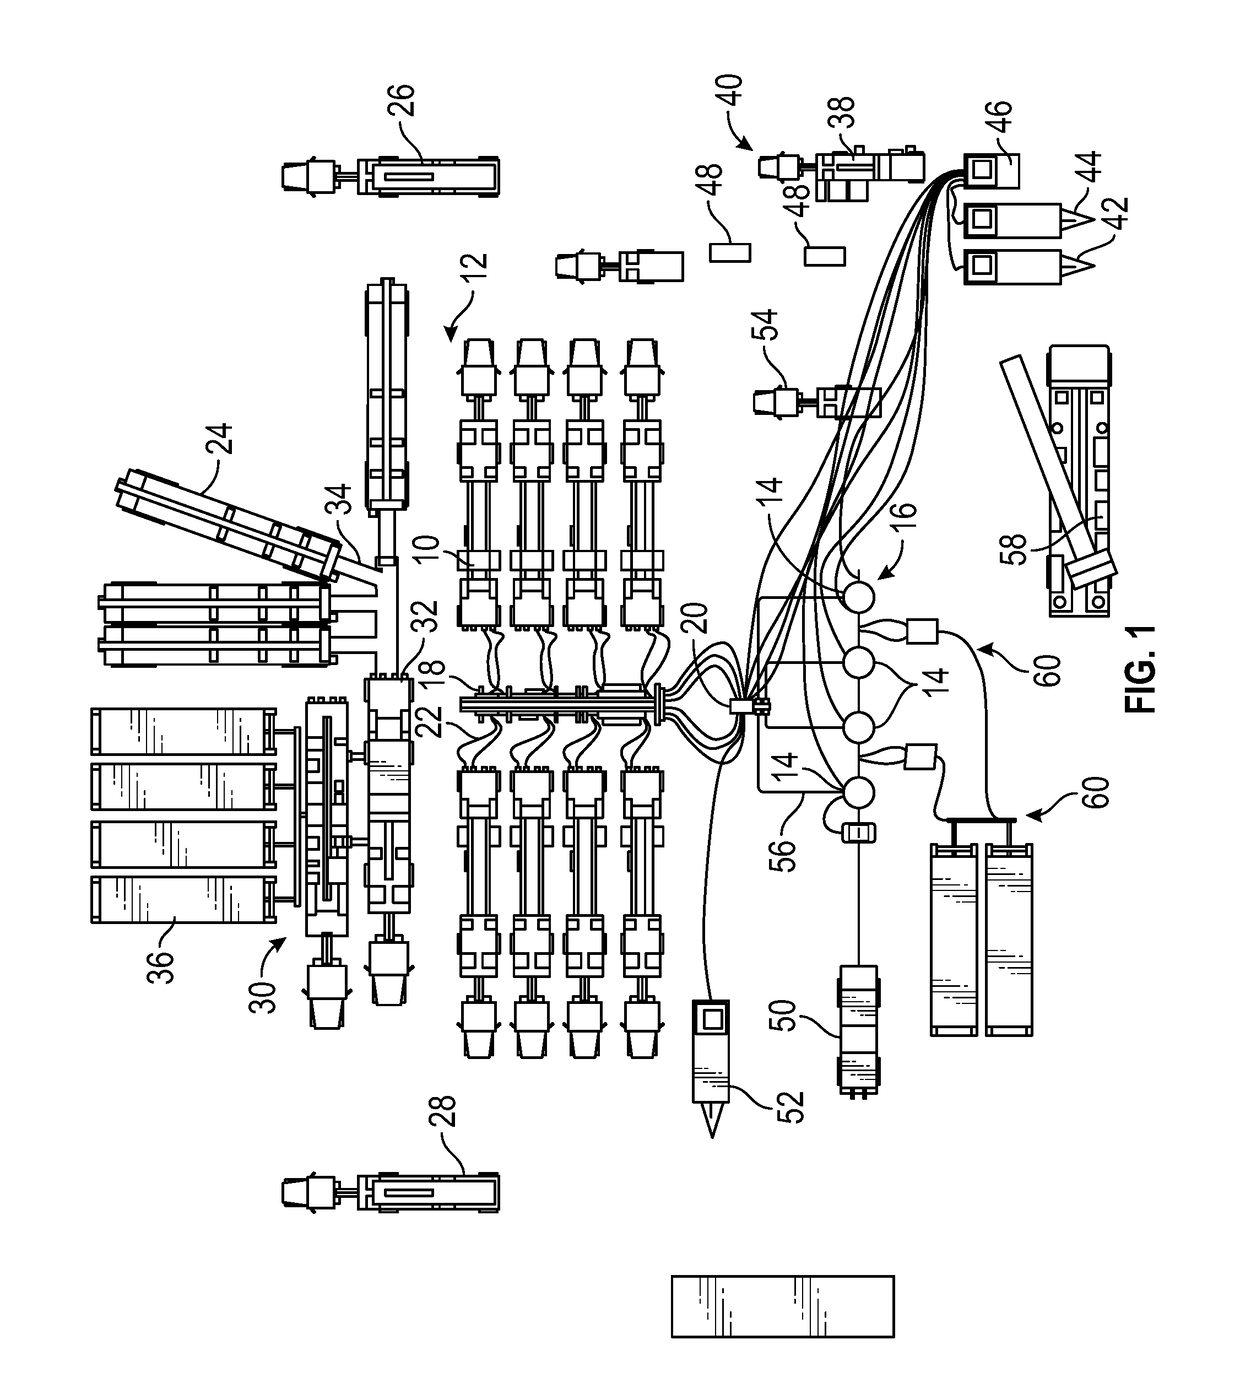 Systems and methods for fracturing a multiple well pad